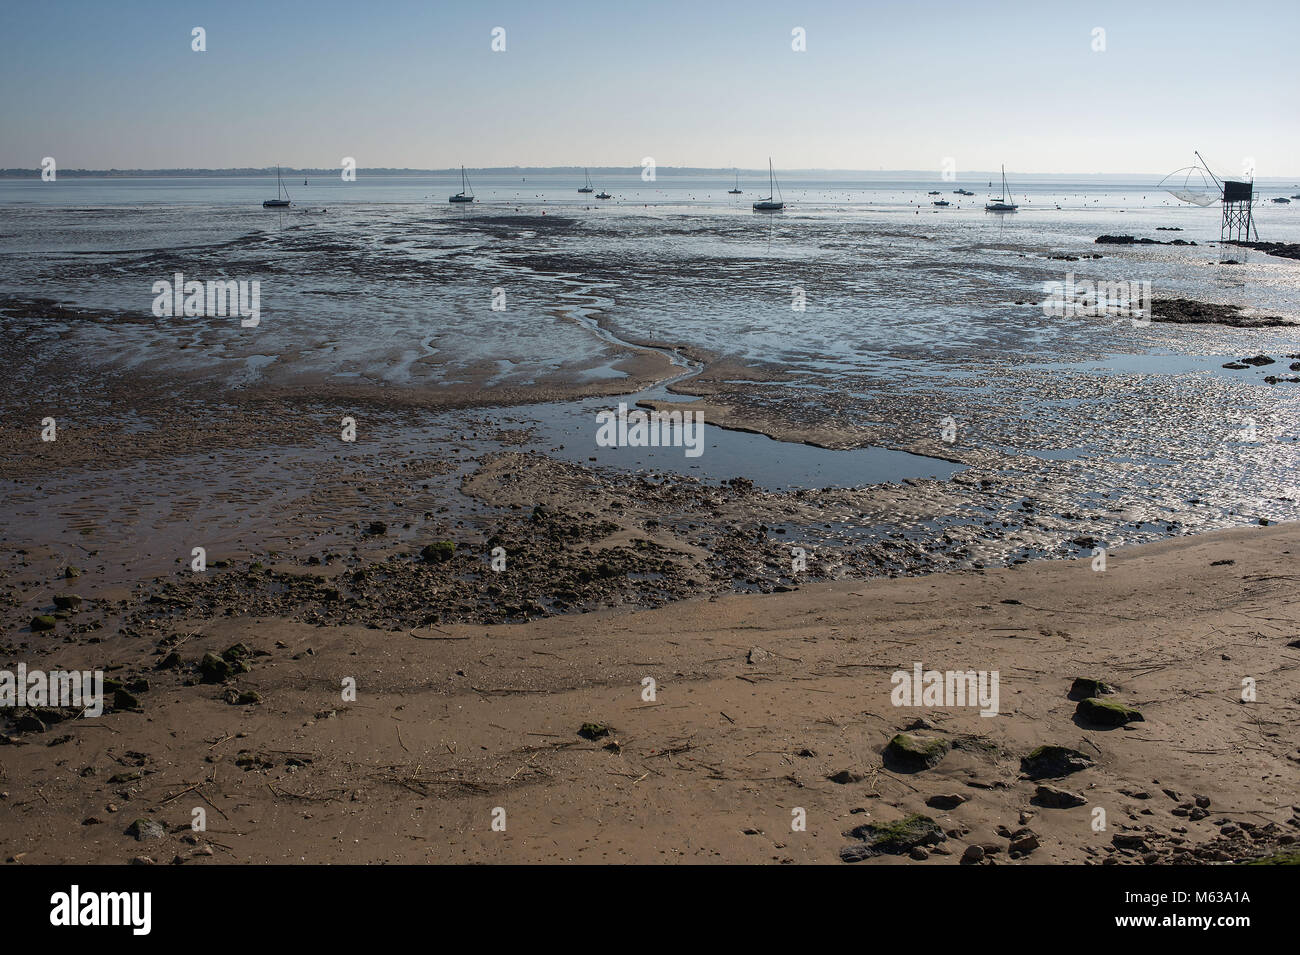 Saint Nazaire, the beach at low tide. France Stock Photo